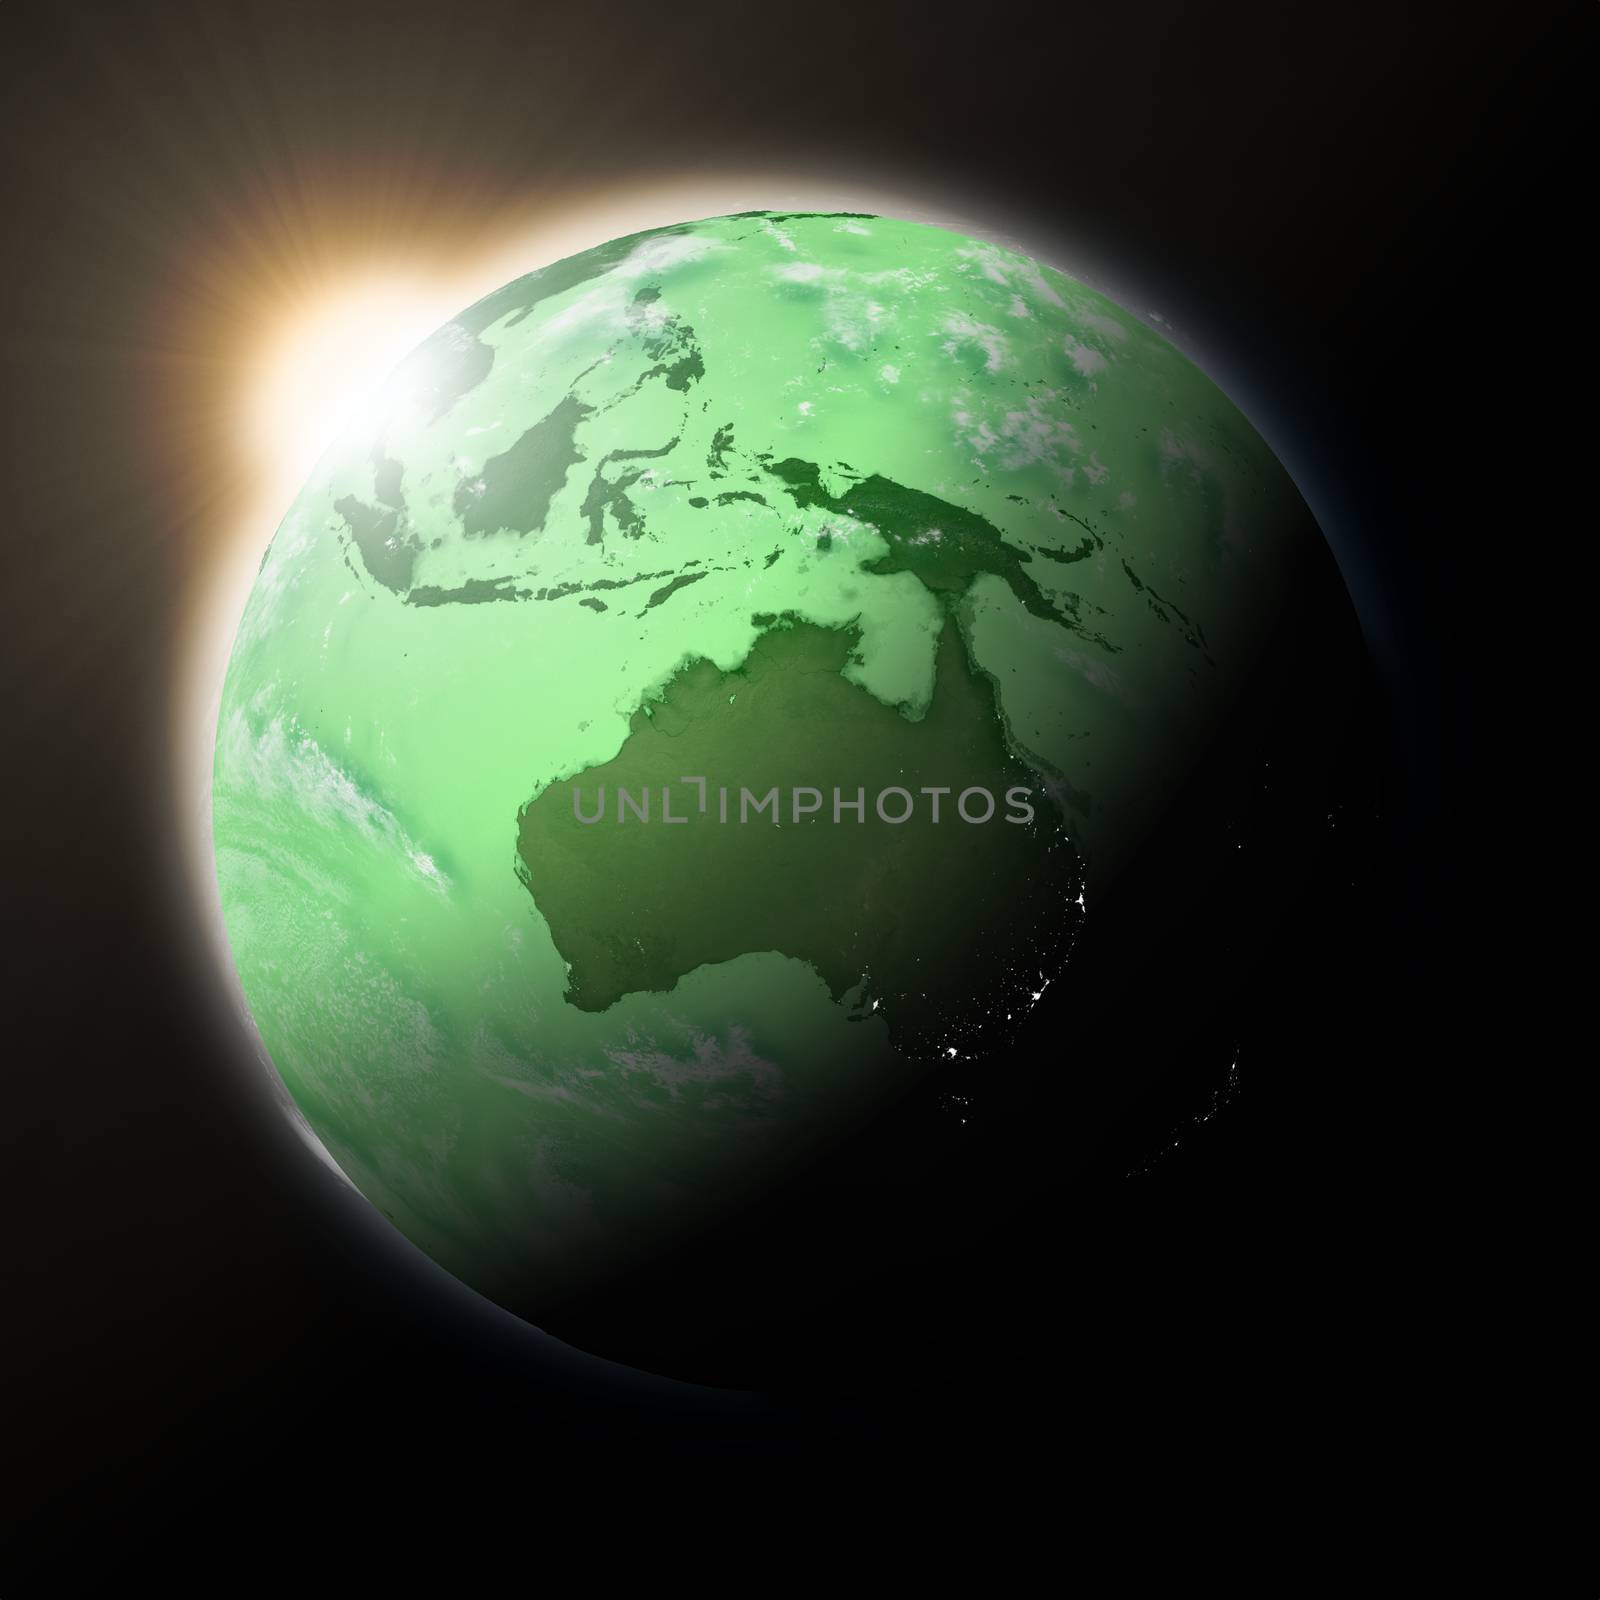 Sun over Australia on green planet Earth by Harvepino